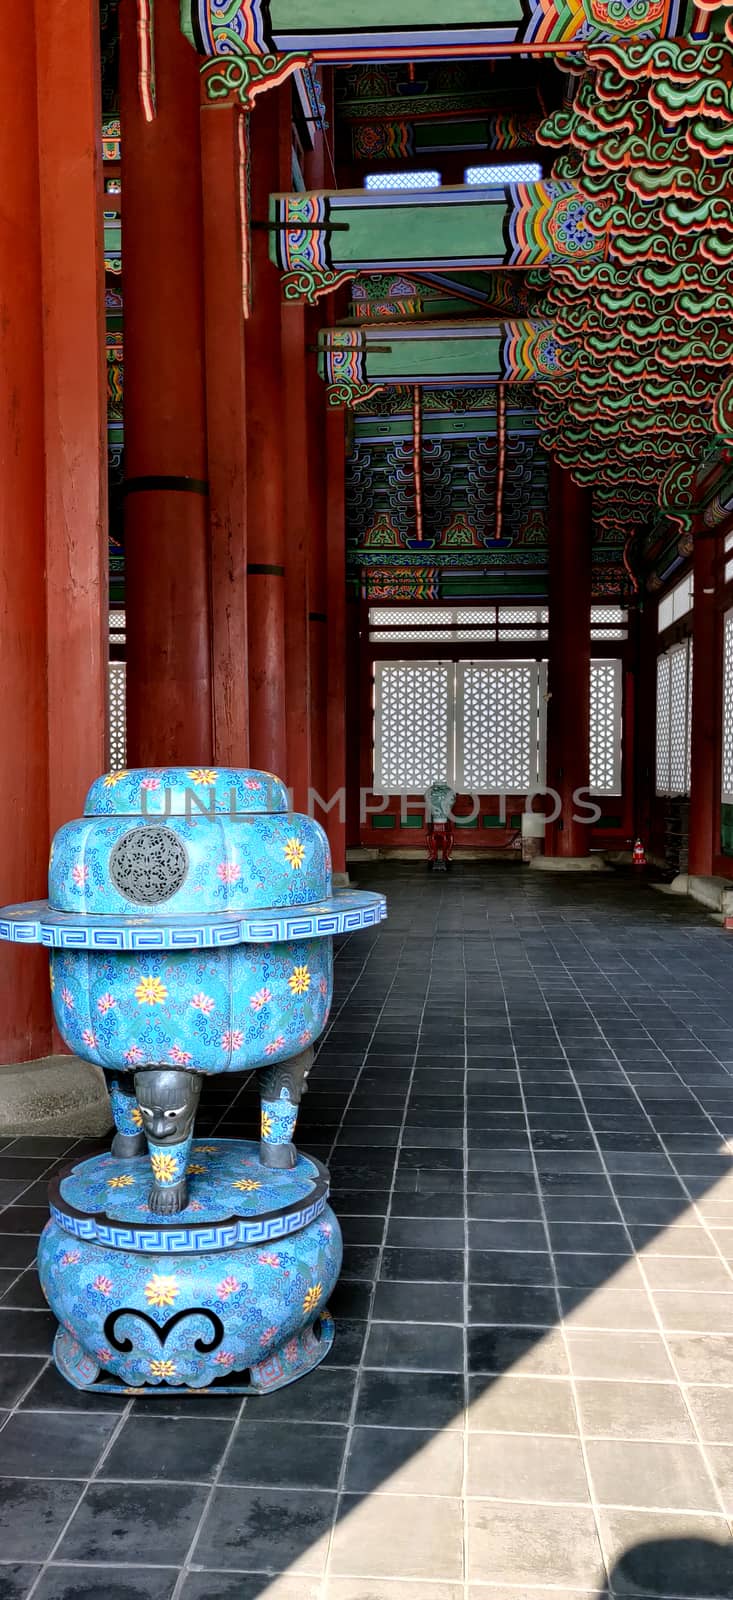 Blue Objects in the Interiors of Royal palace, Gyeongbokgung, in Seoul, Korea